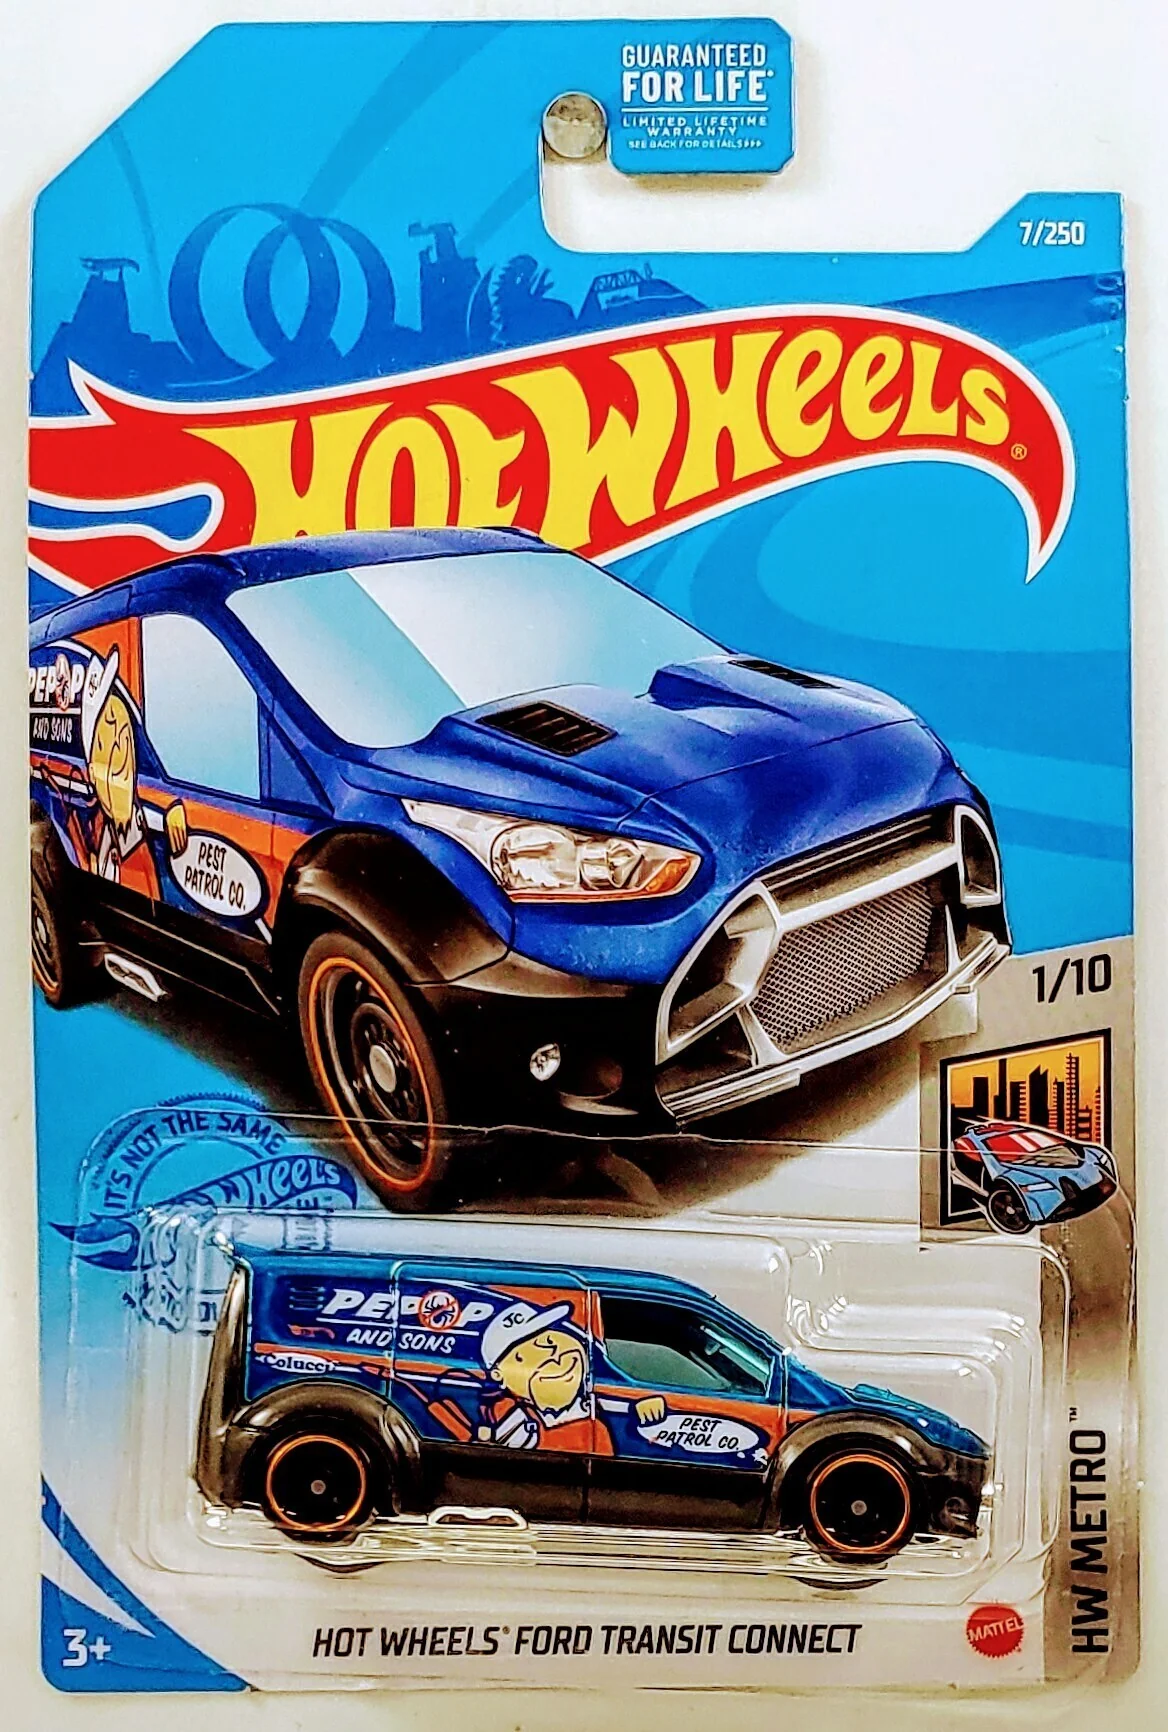 Hot wheels ford transit connect - HW metro Hot wheels ford transit connect - Hot Wheels